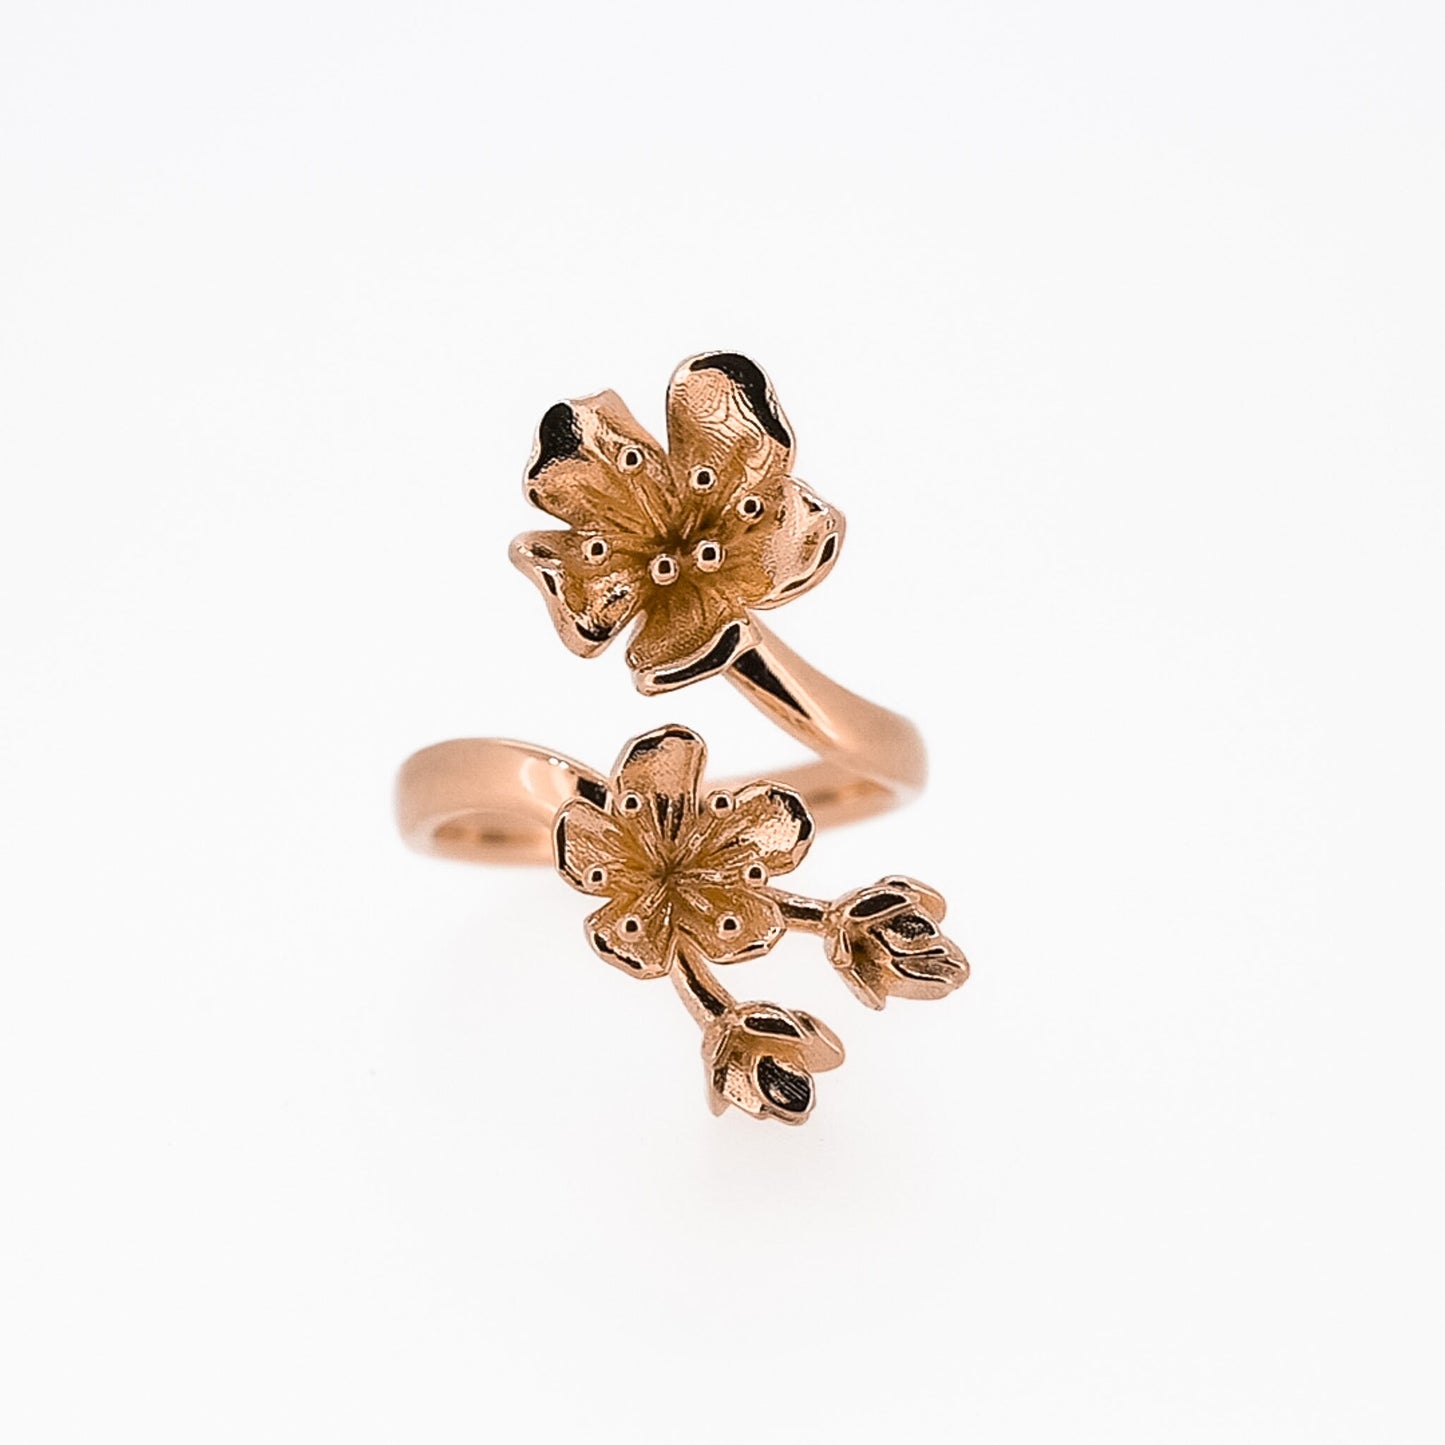 Cherry Blossom Adjustable Wrap Ring in 14K Yellow Gold, 14k White Gold,14K Rose Gold